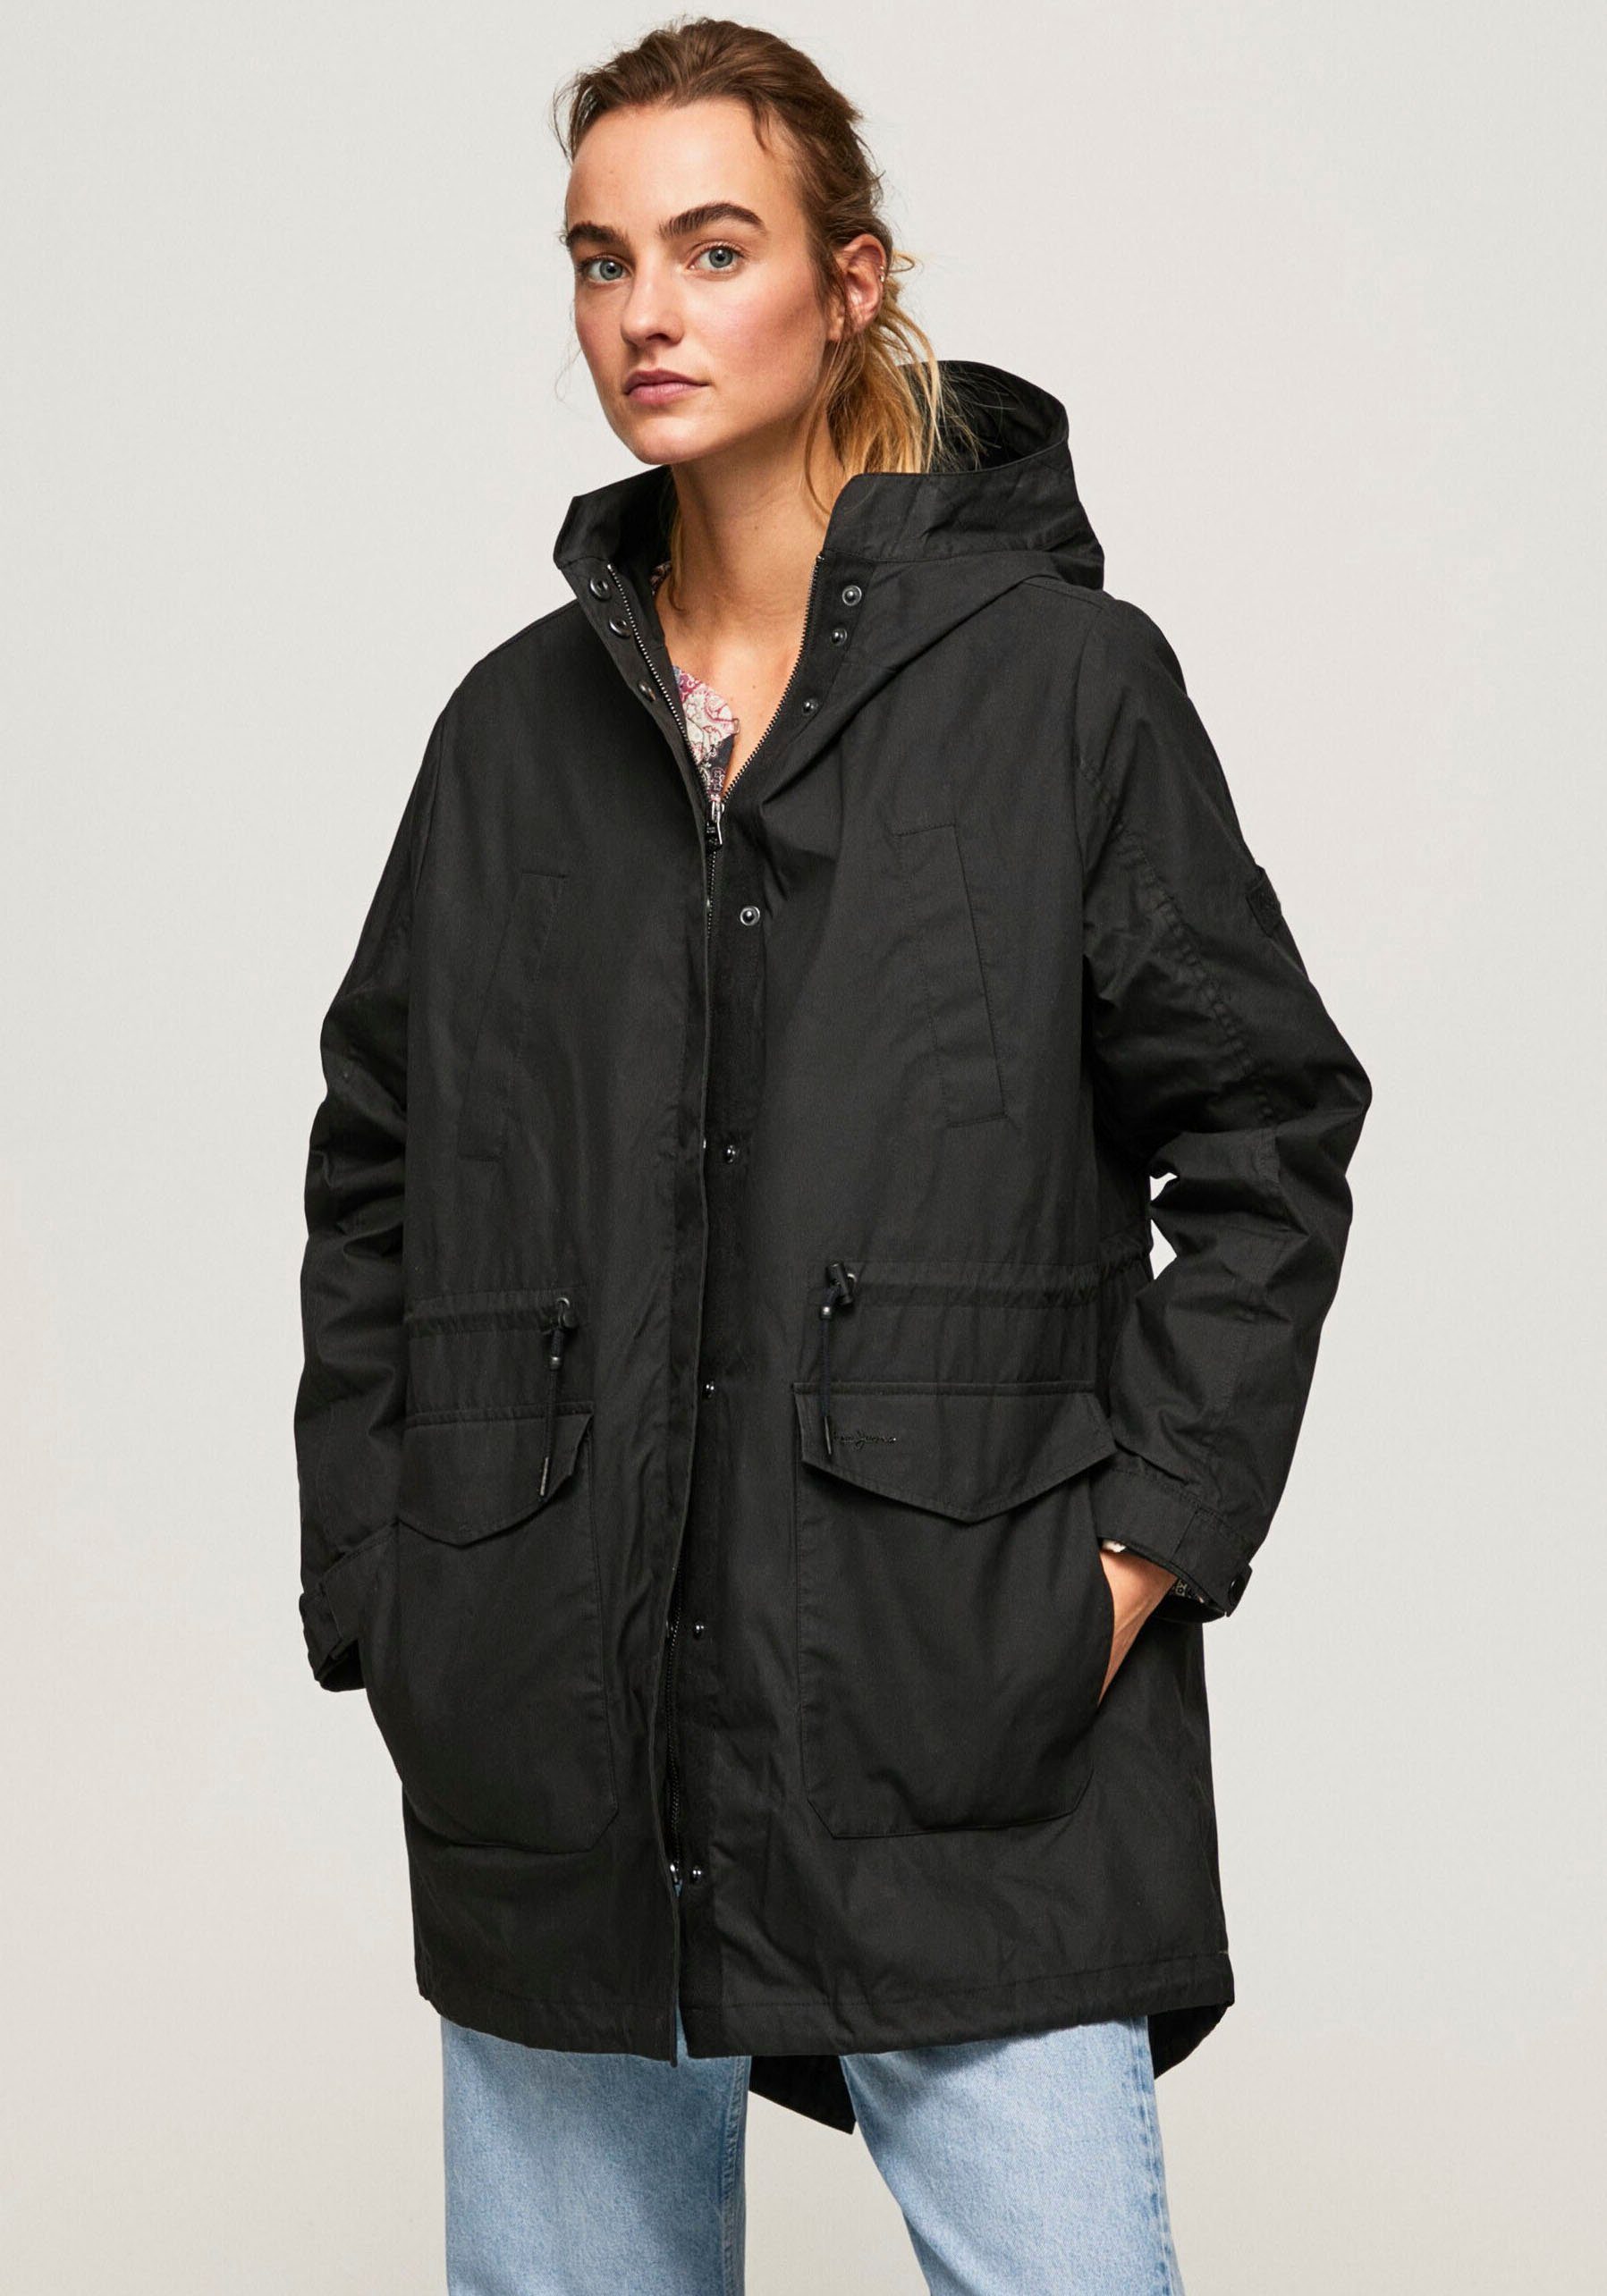 Parka ROONEY Pepe Jeans